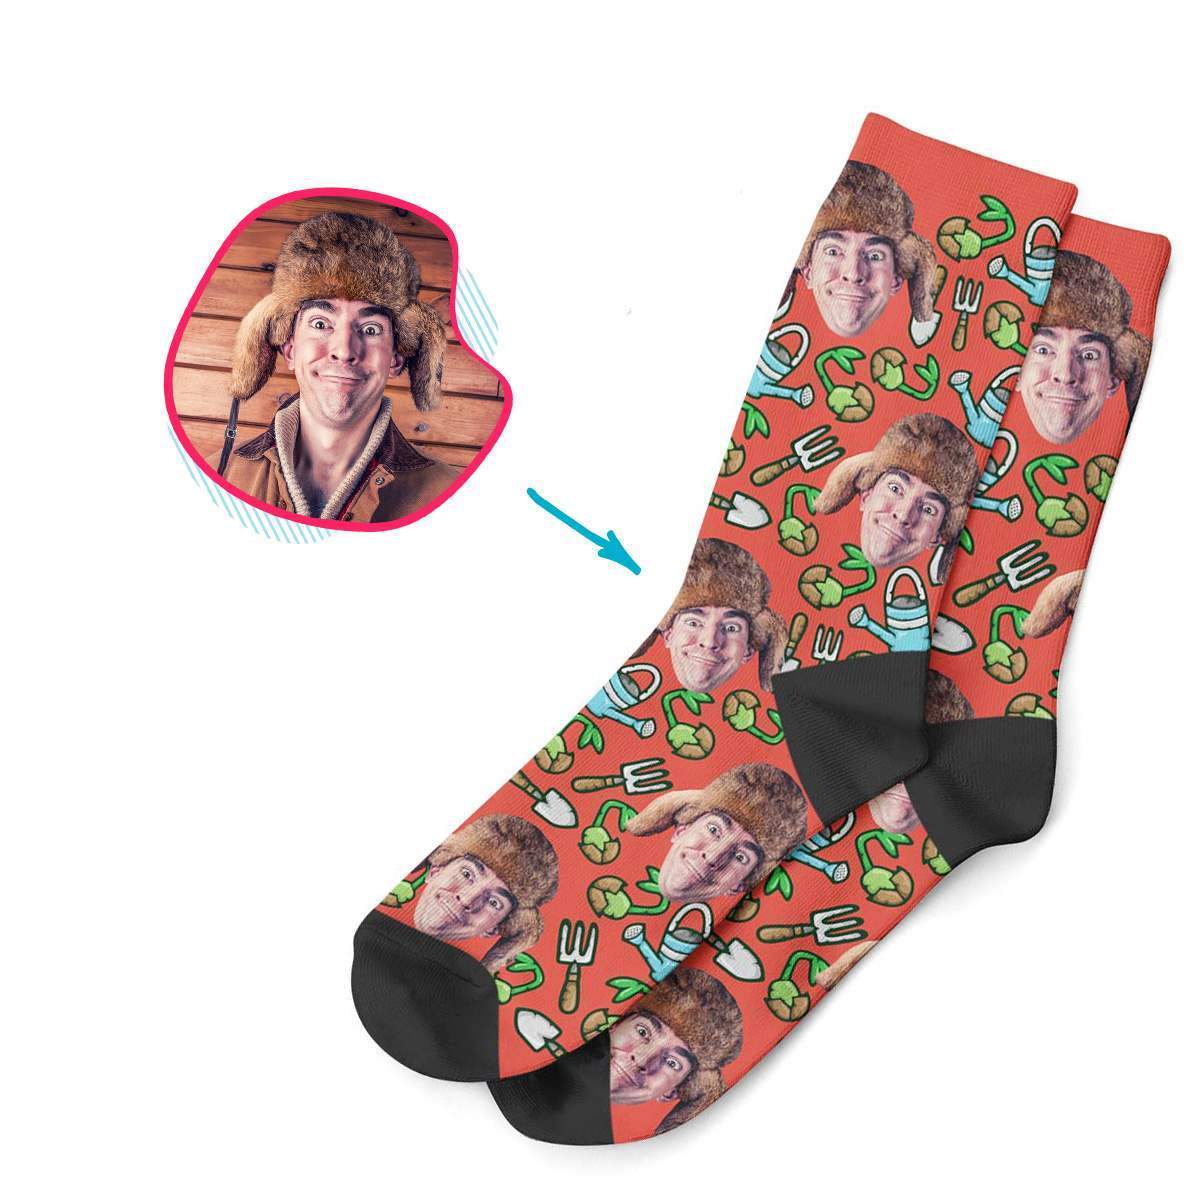 red Gardening socks personalized with photo of face printed on them